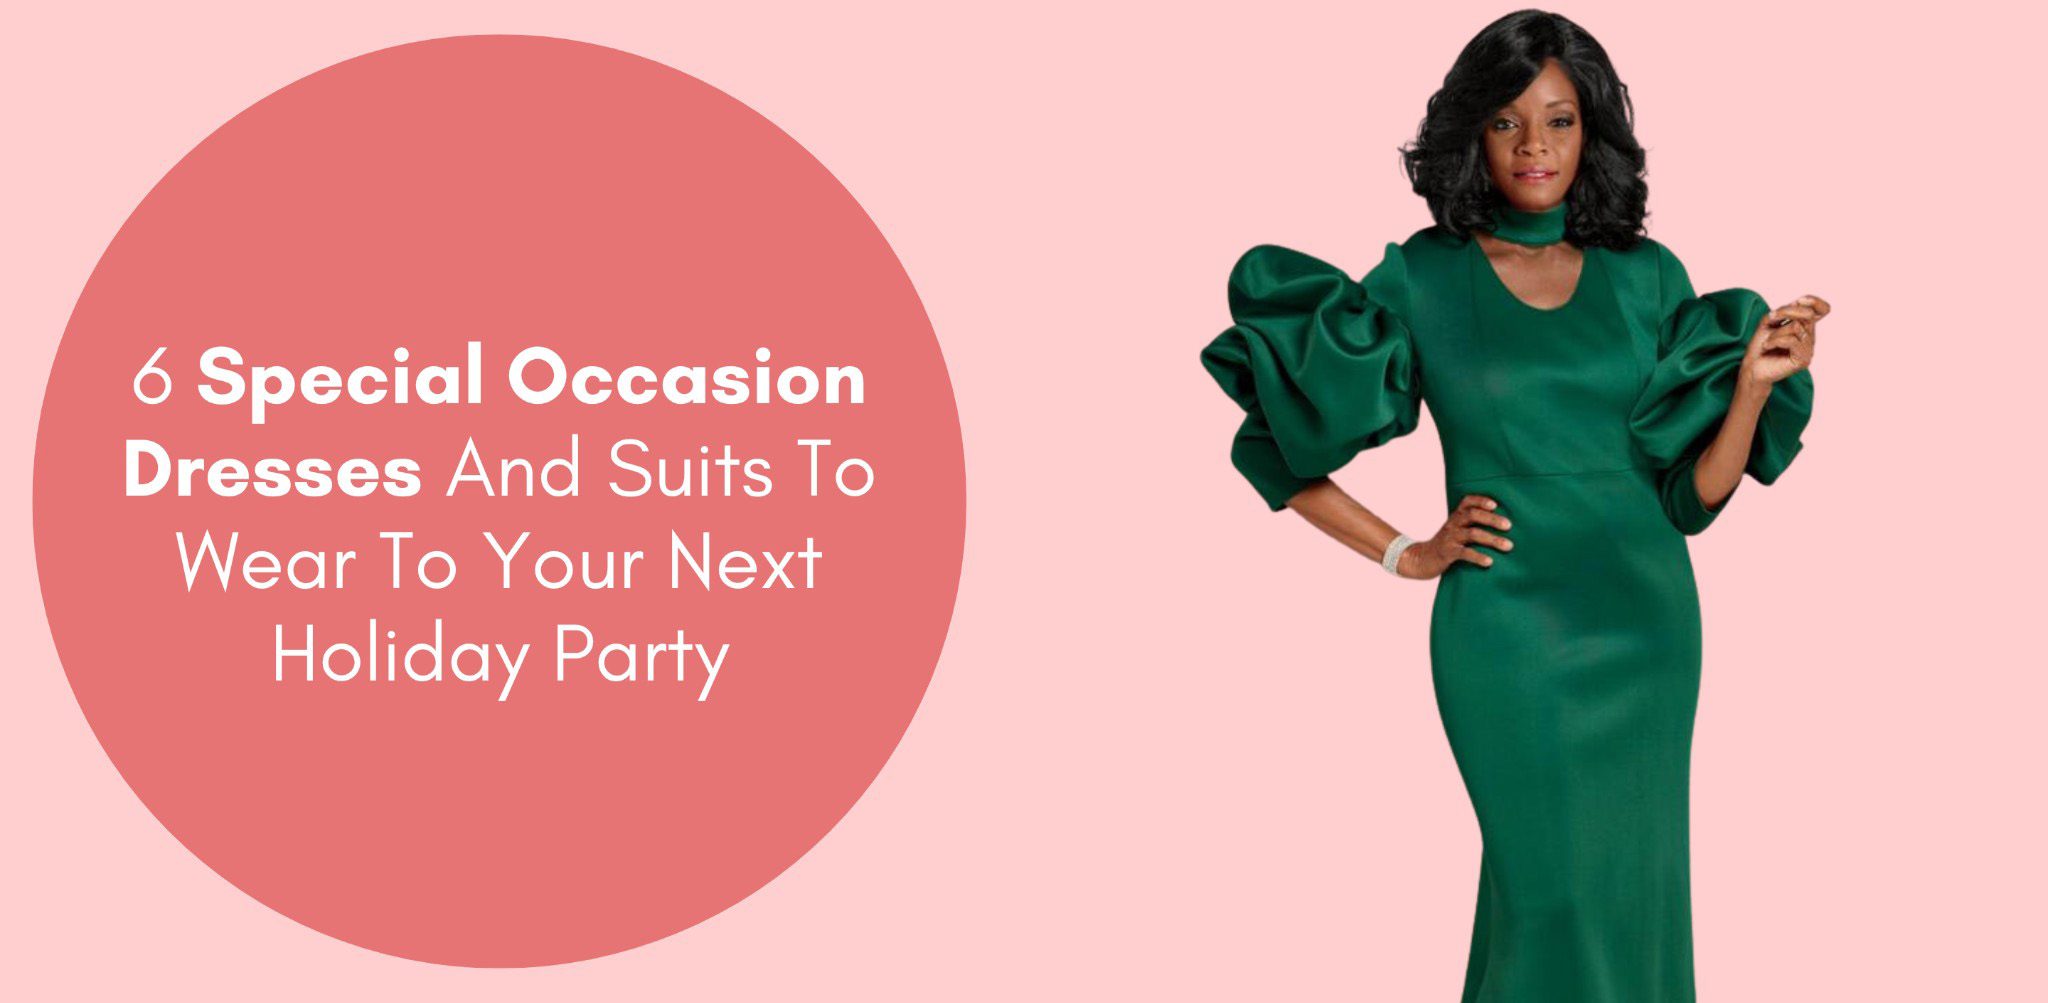 6 special occasion dresses